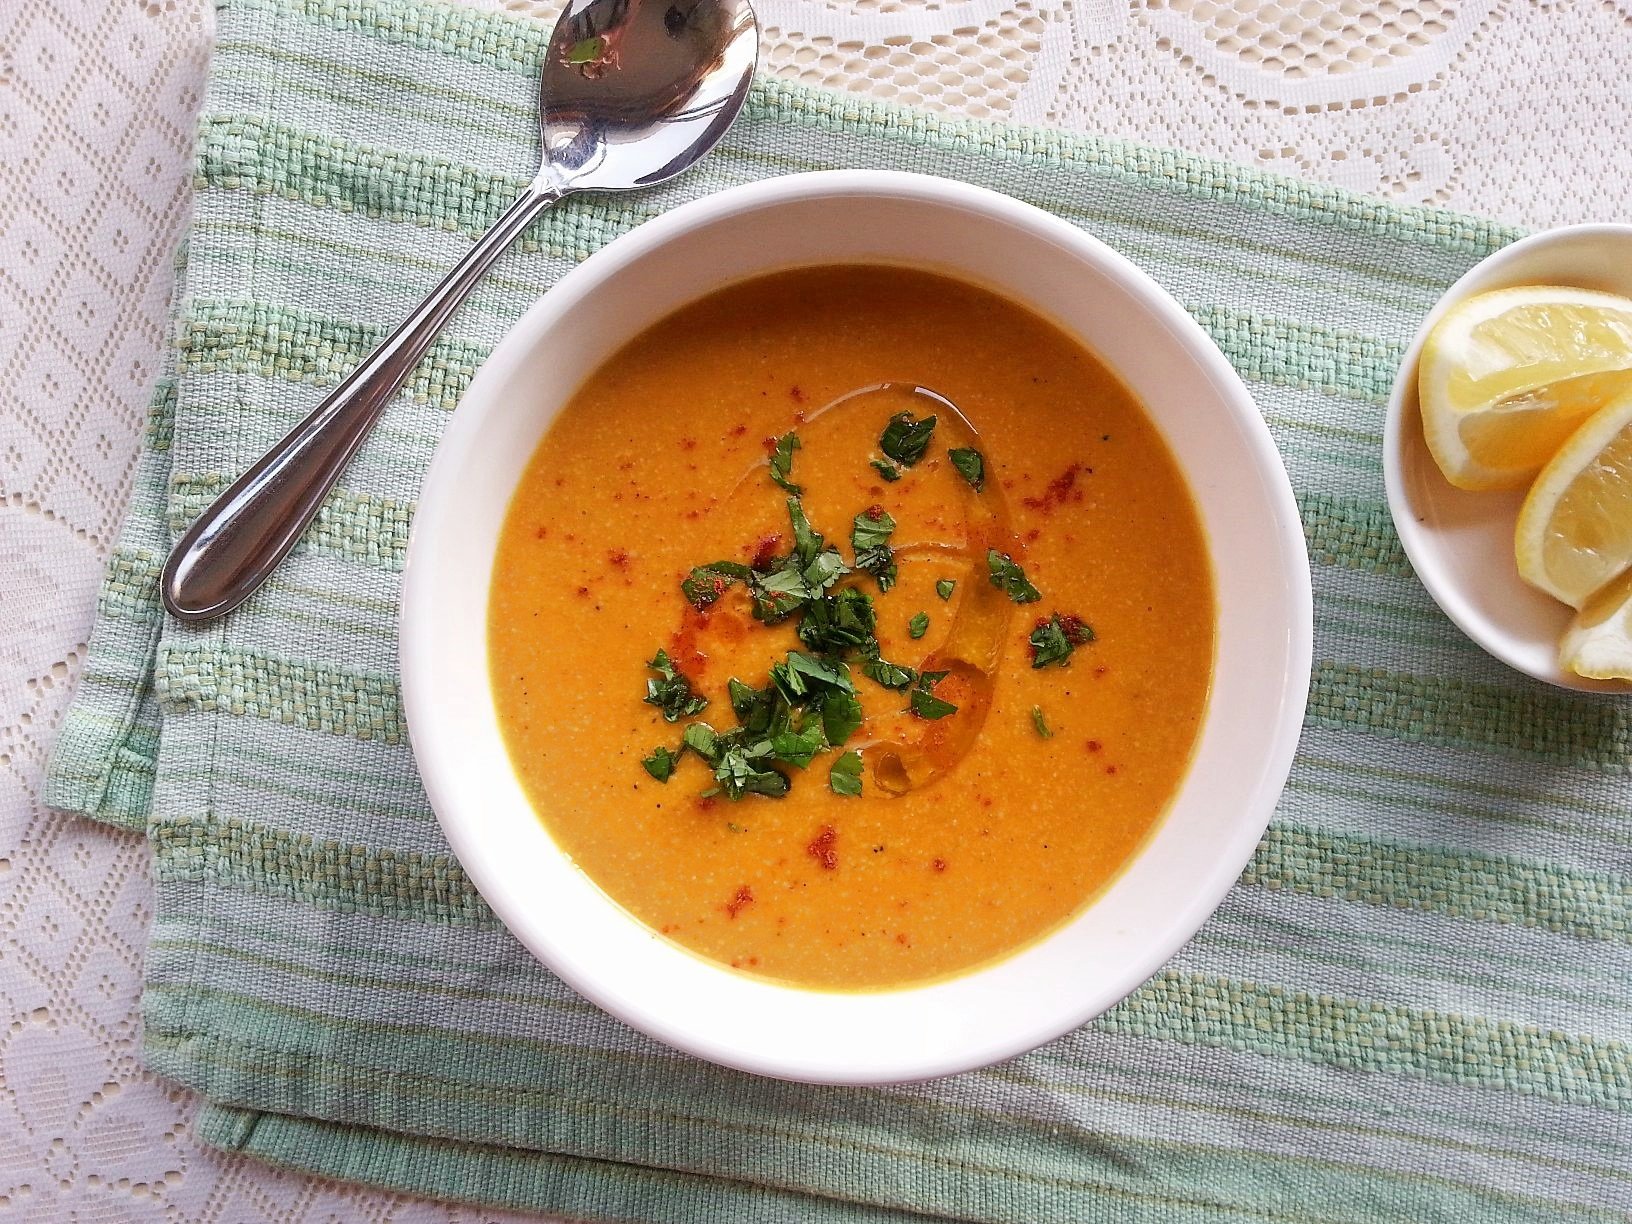 Spicy Red Lentil Soup with Cashew Cream